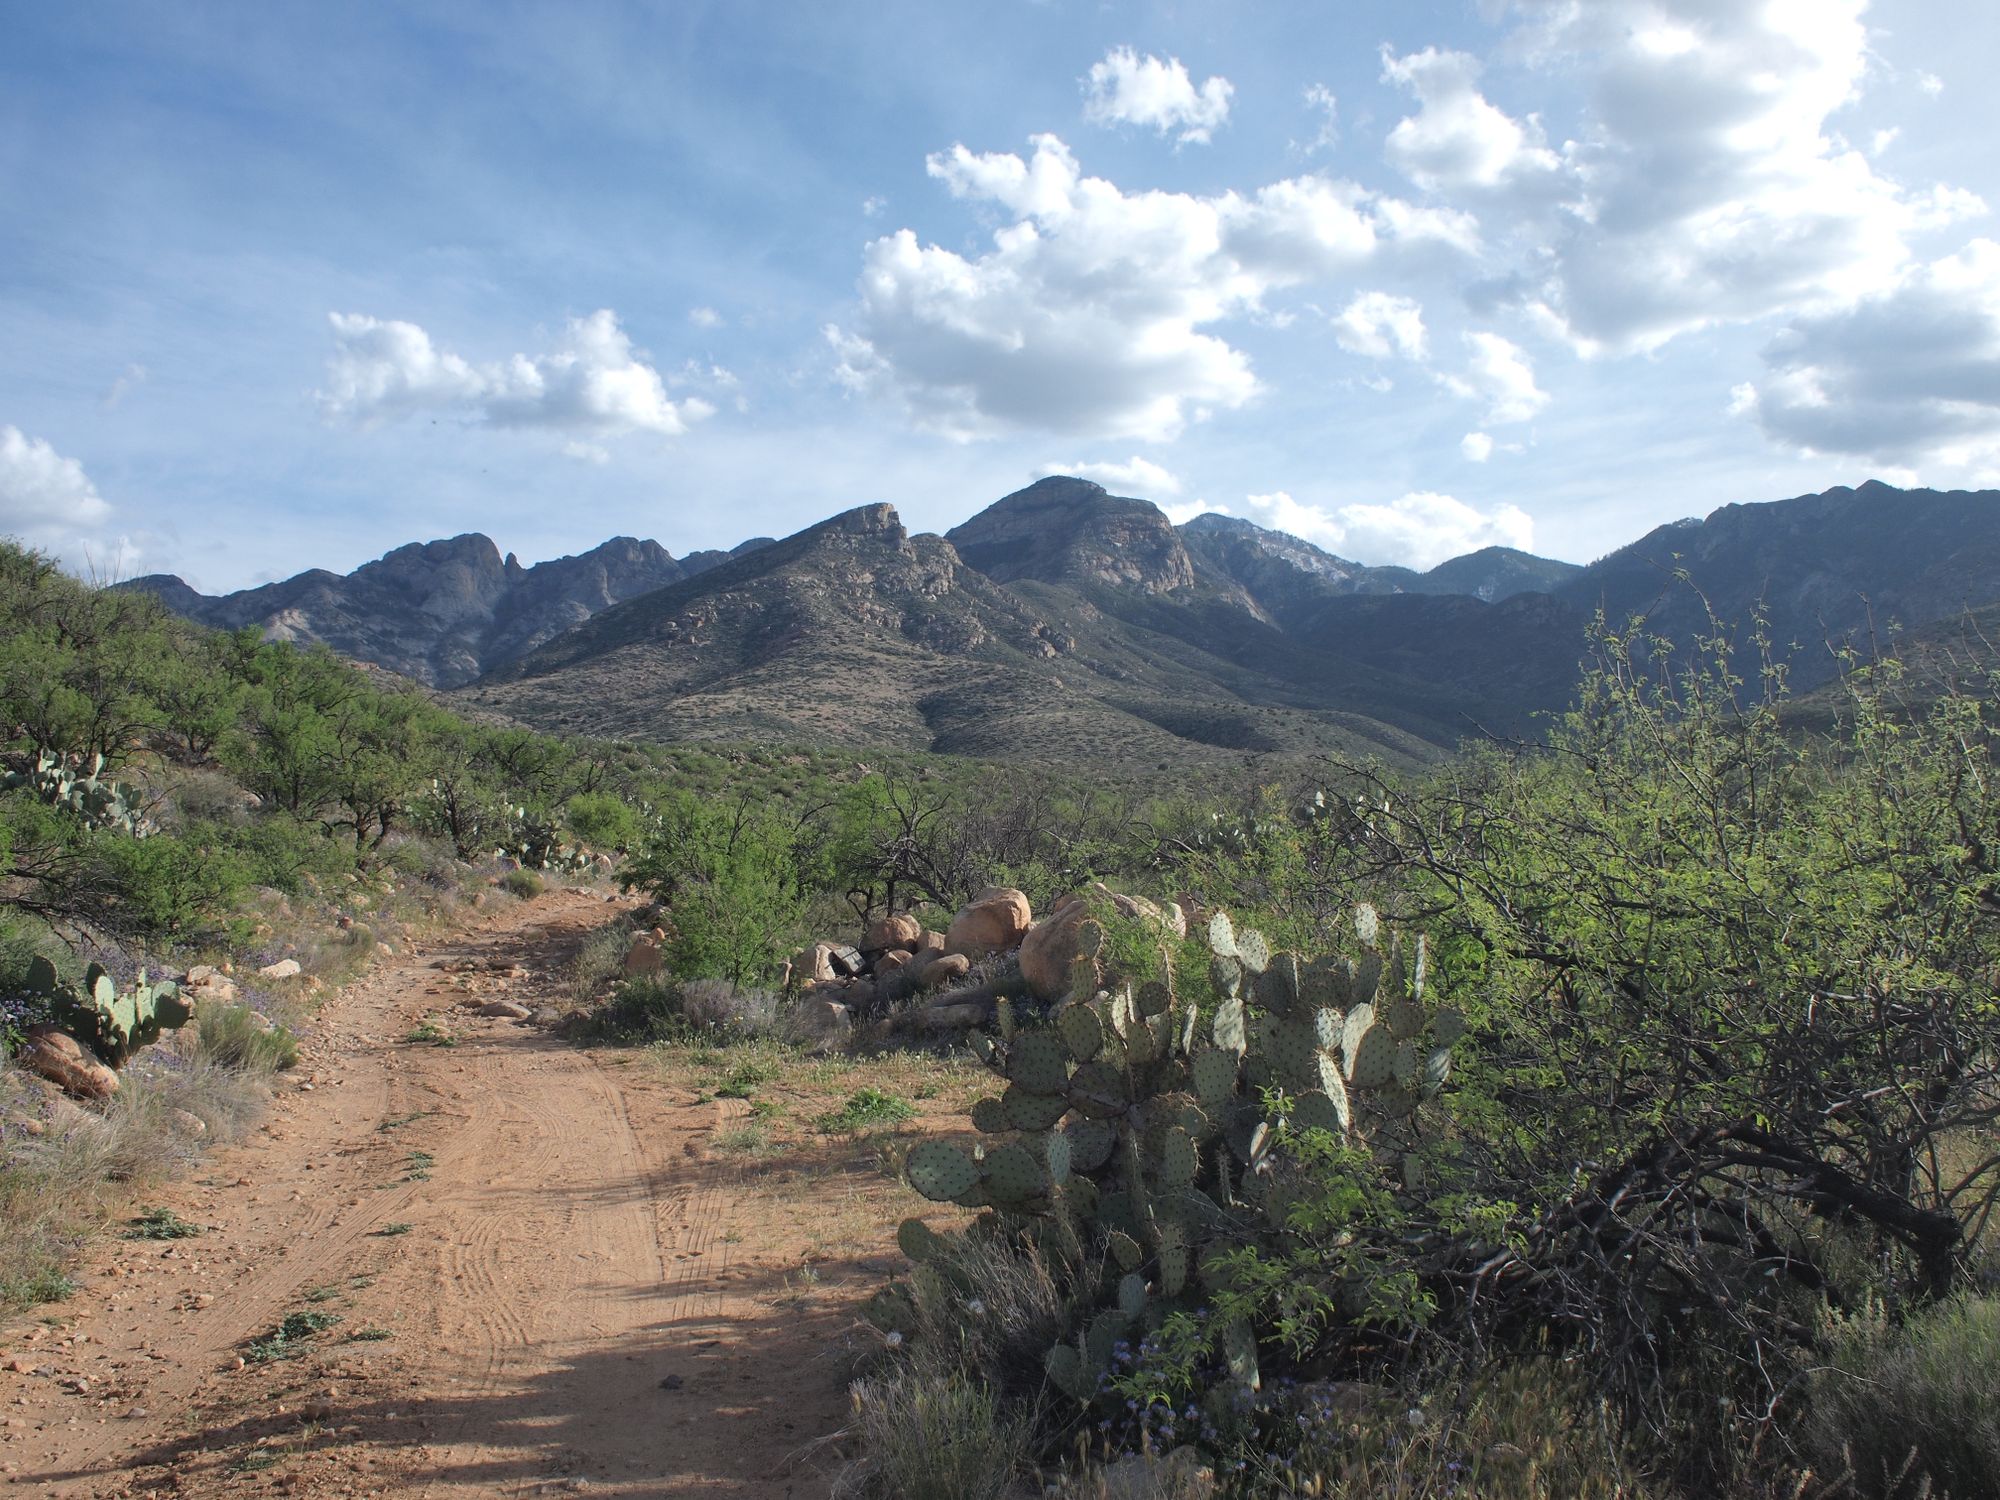 A mountain landscape with snowy, pine covered peaks in the background, a dirt road lined with mesquite and cactus in the foreground.